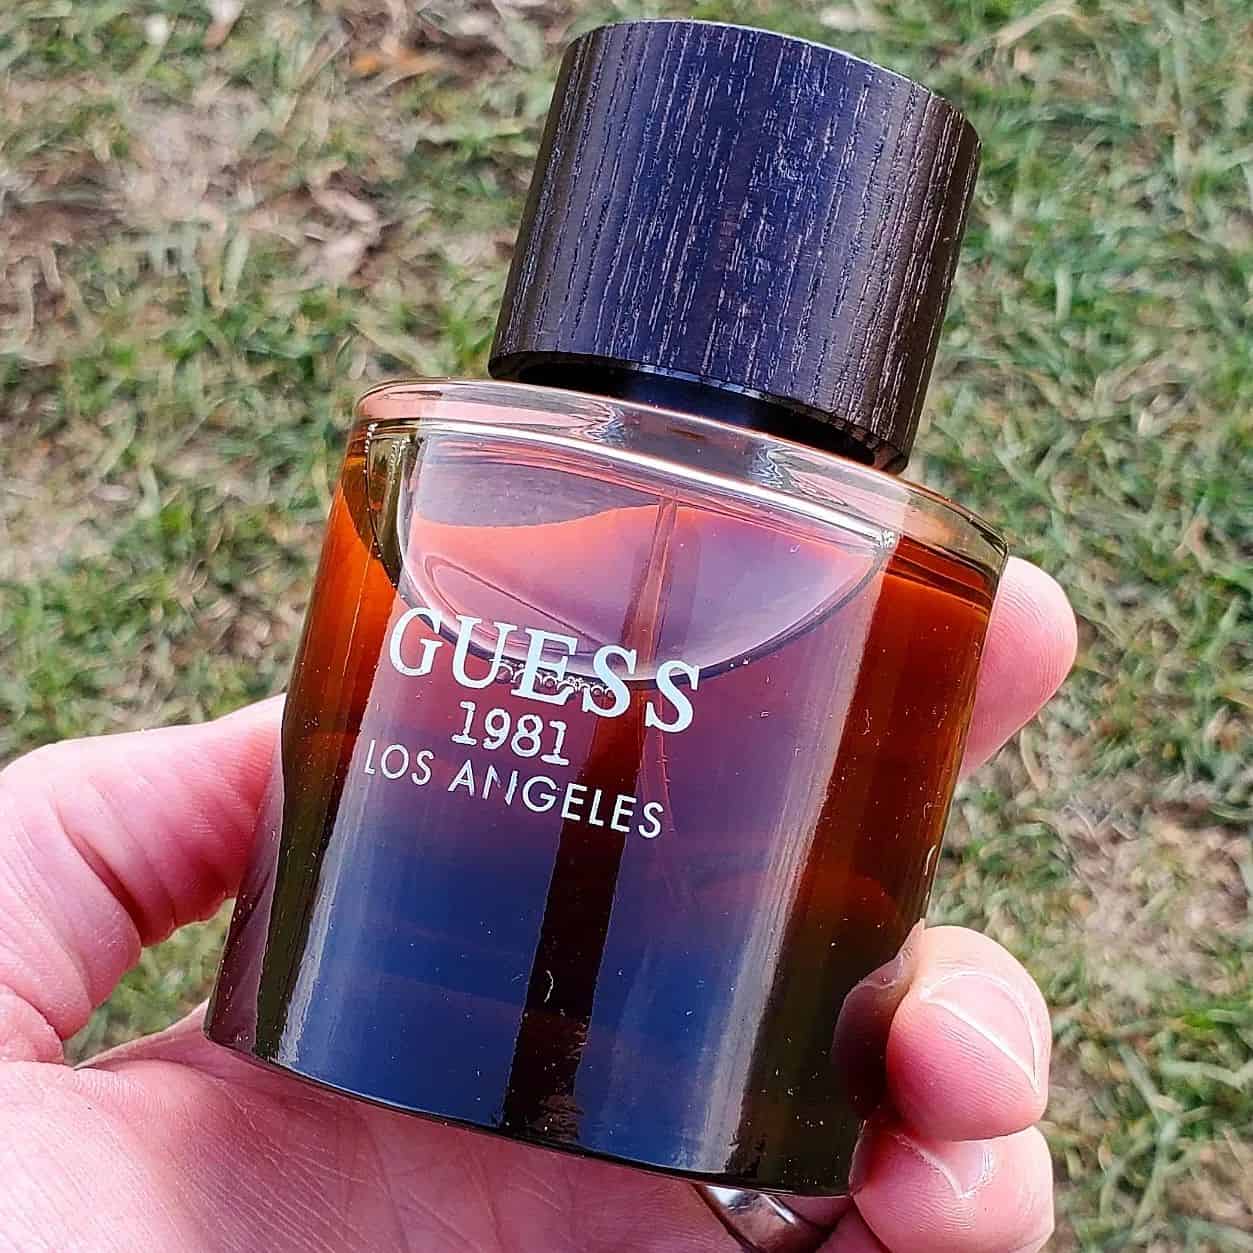 holding a bottle of 1981 los angeles cologne by guess